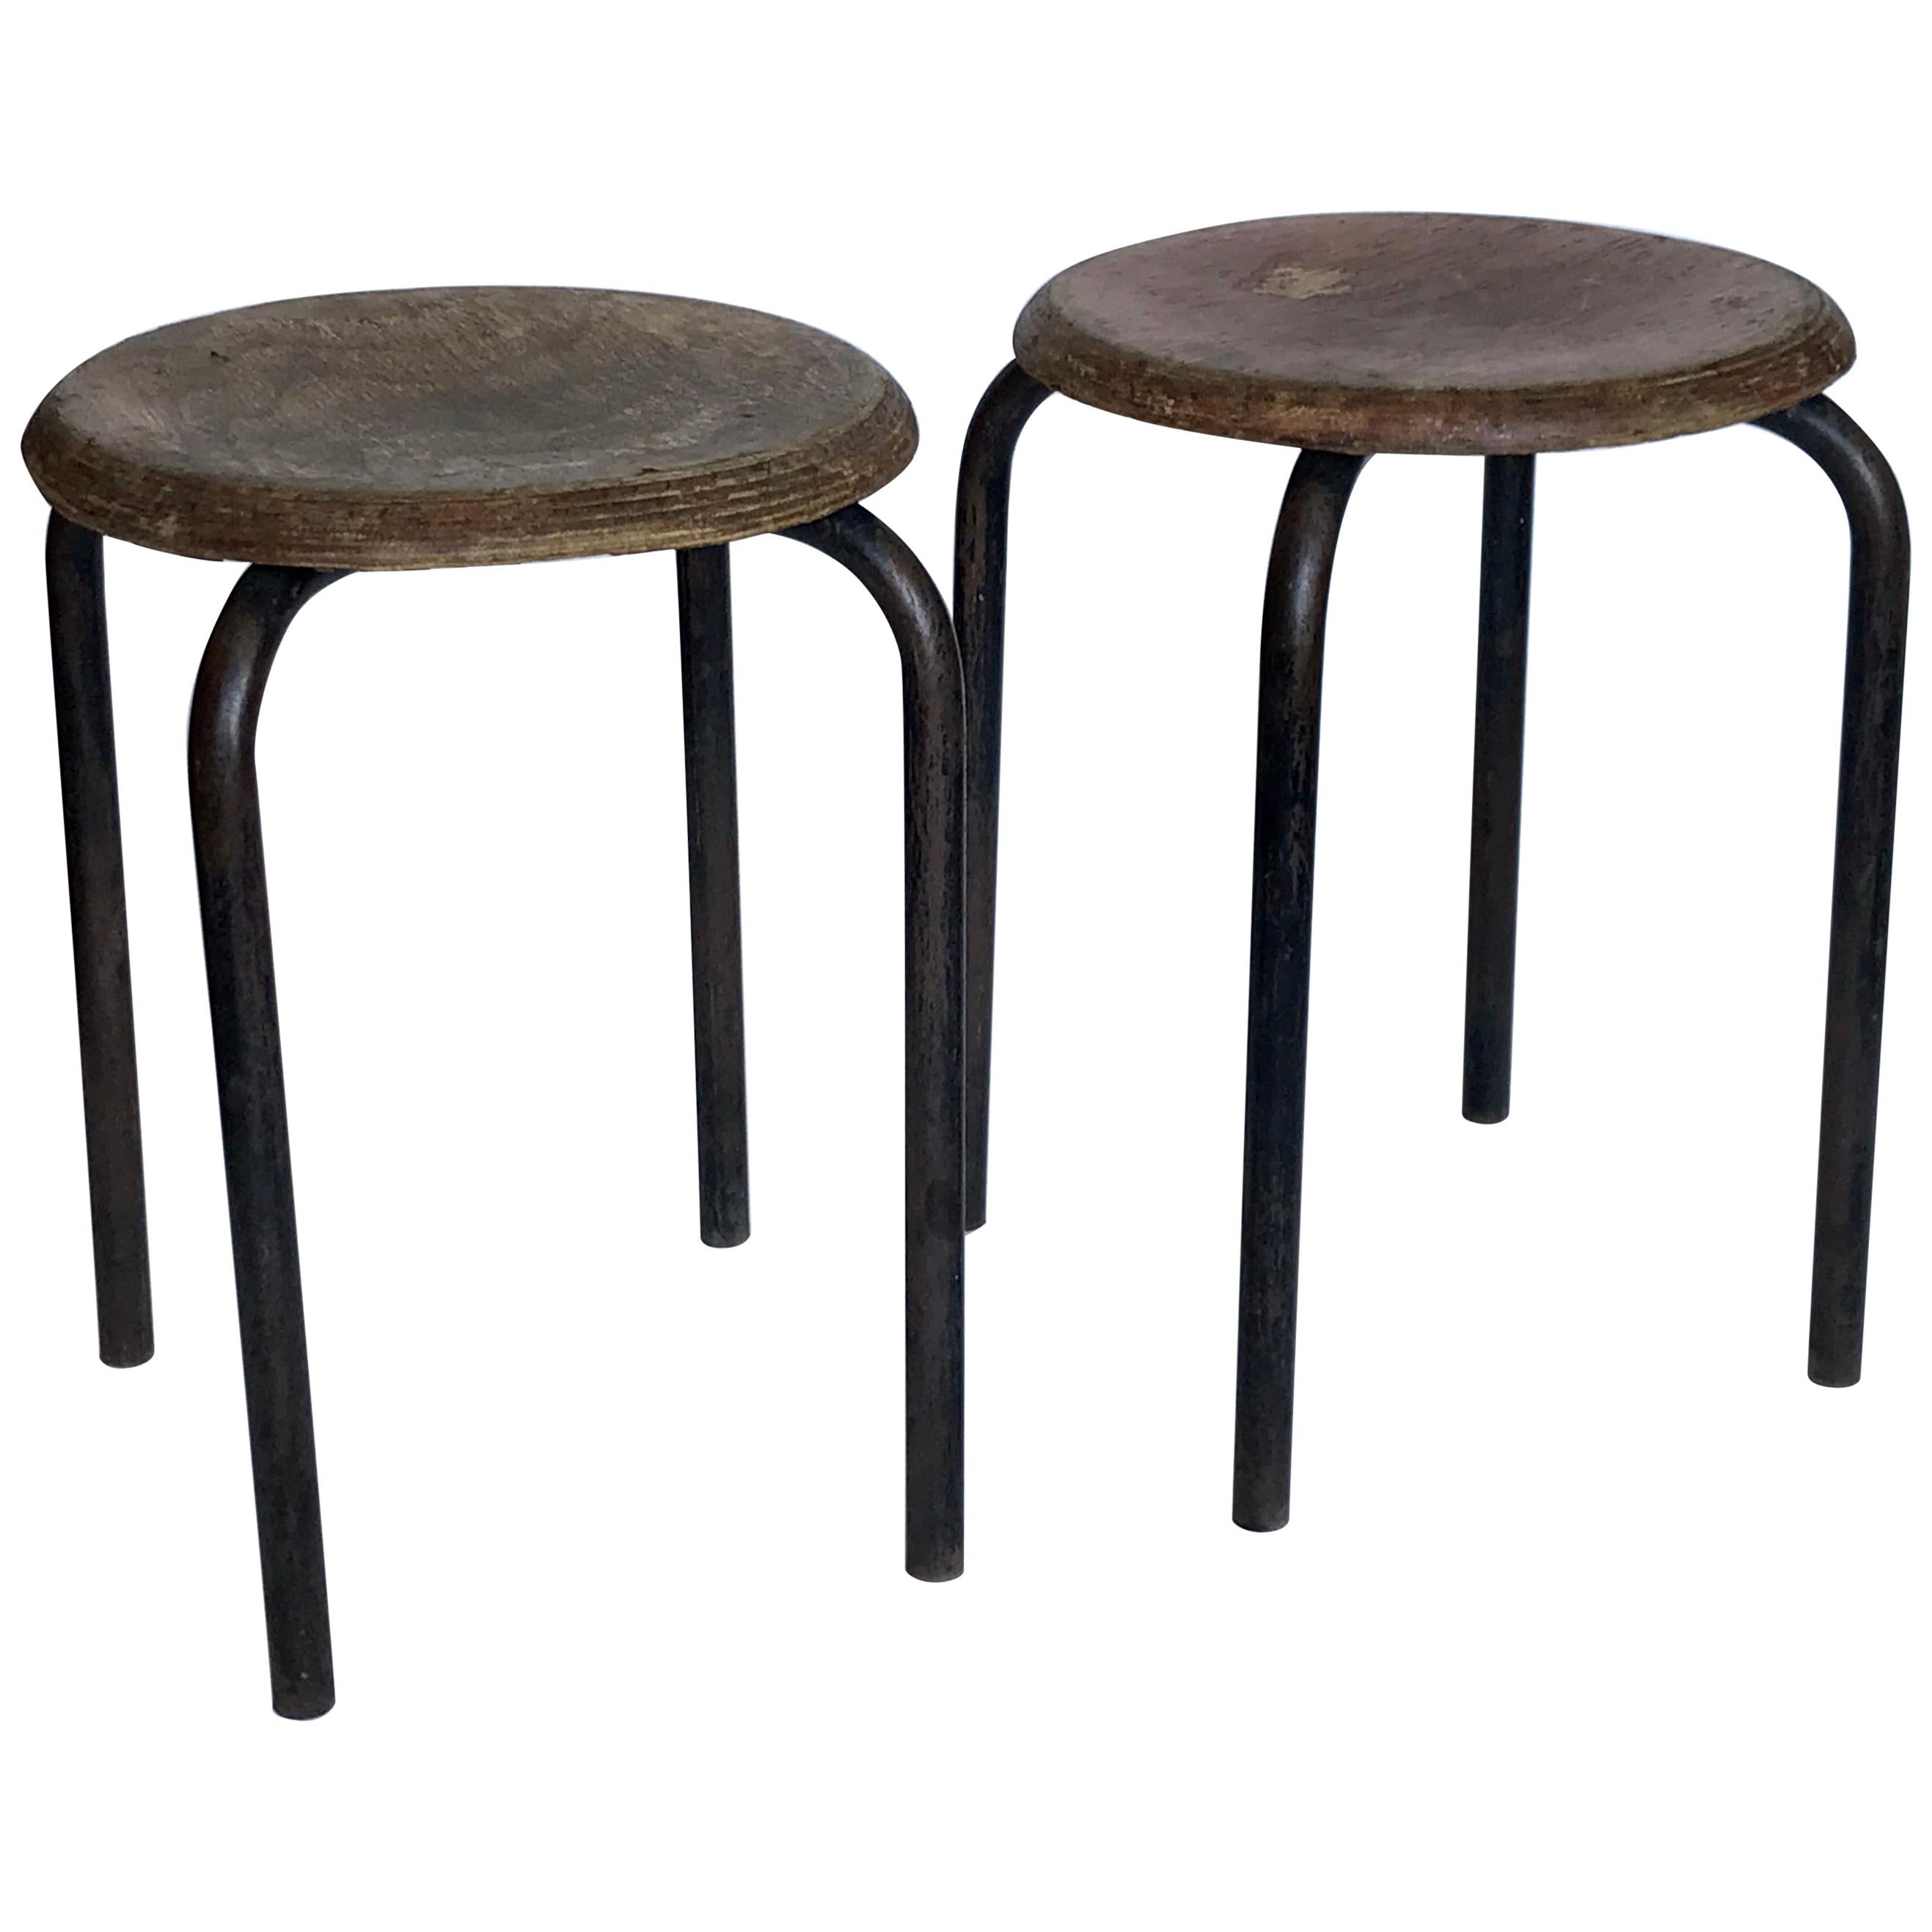 French Industrial Stools Ateliers Prouve, 20th Century